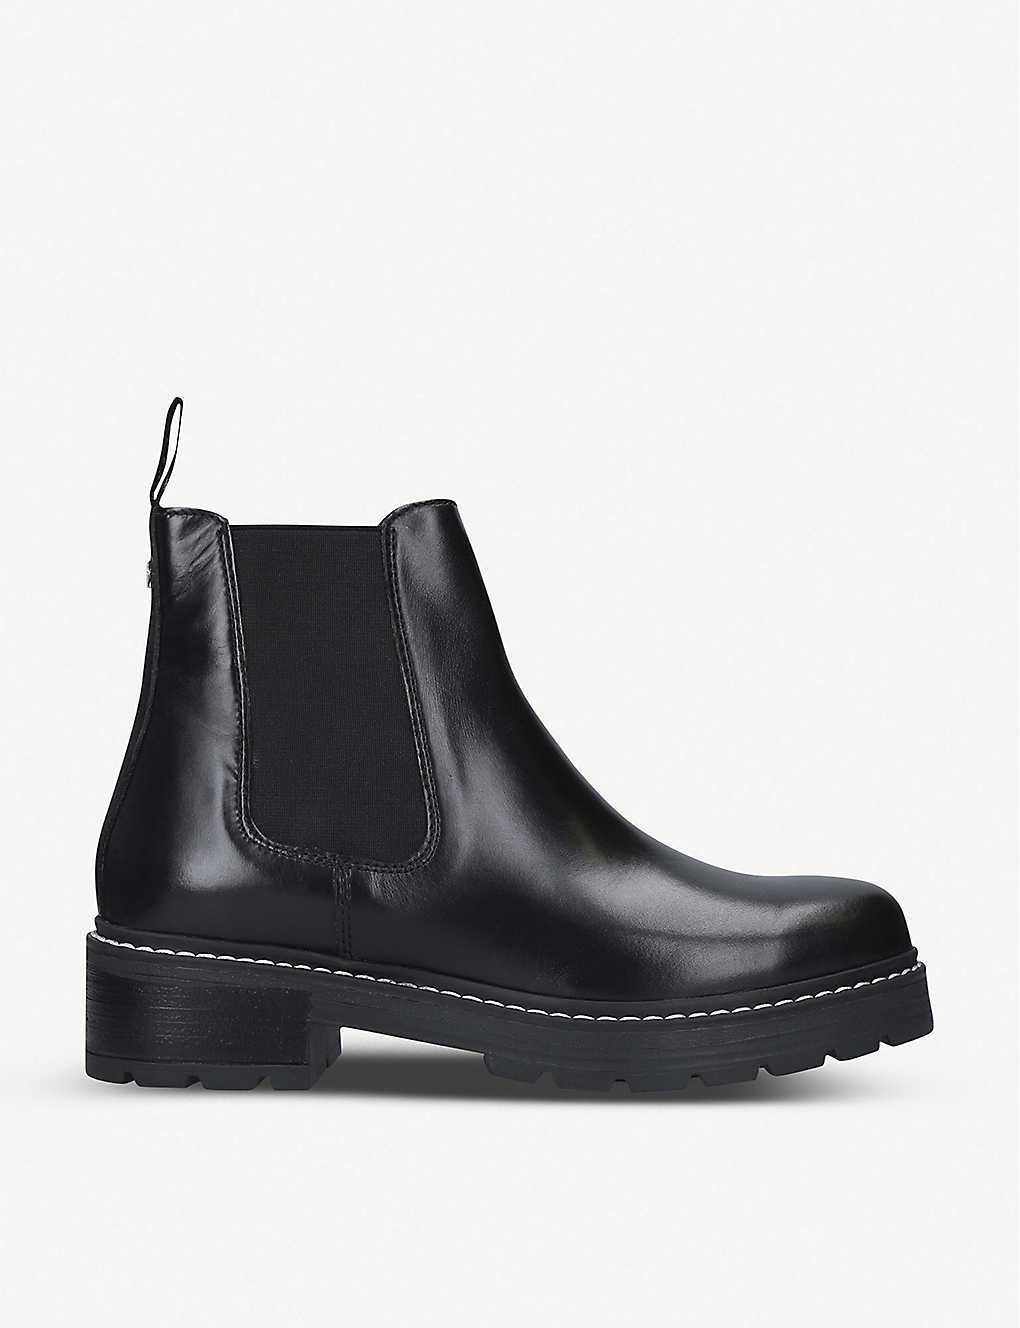 CARVELA Taken leather Chelsea boots inexpensive & exceptional style ...